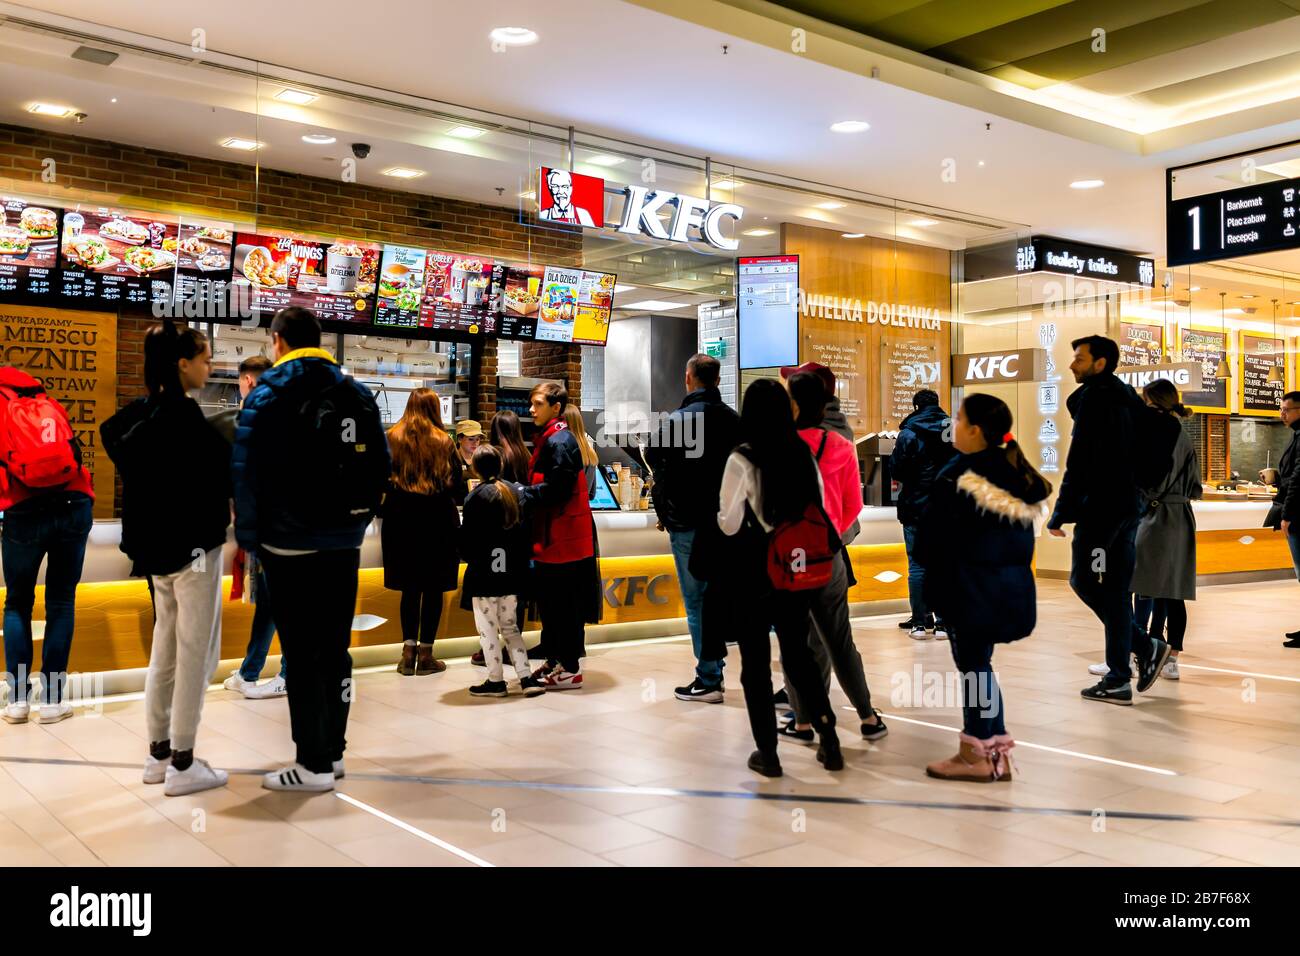 Warsaw, Poland - December 23, 2019: Food court with people standing waiting in line for KFC Kentucky Fried Chicken fast food chain restaurant inside o Stock Photo